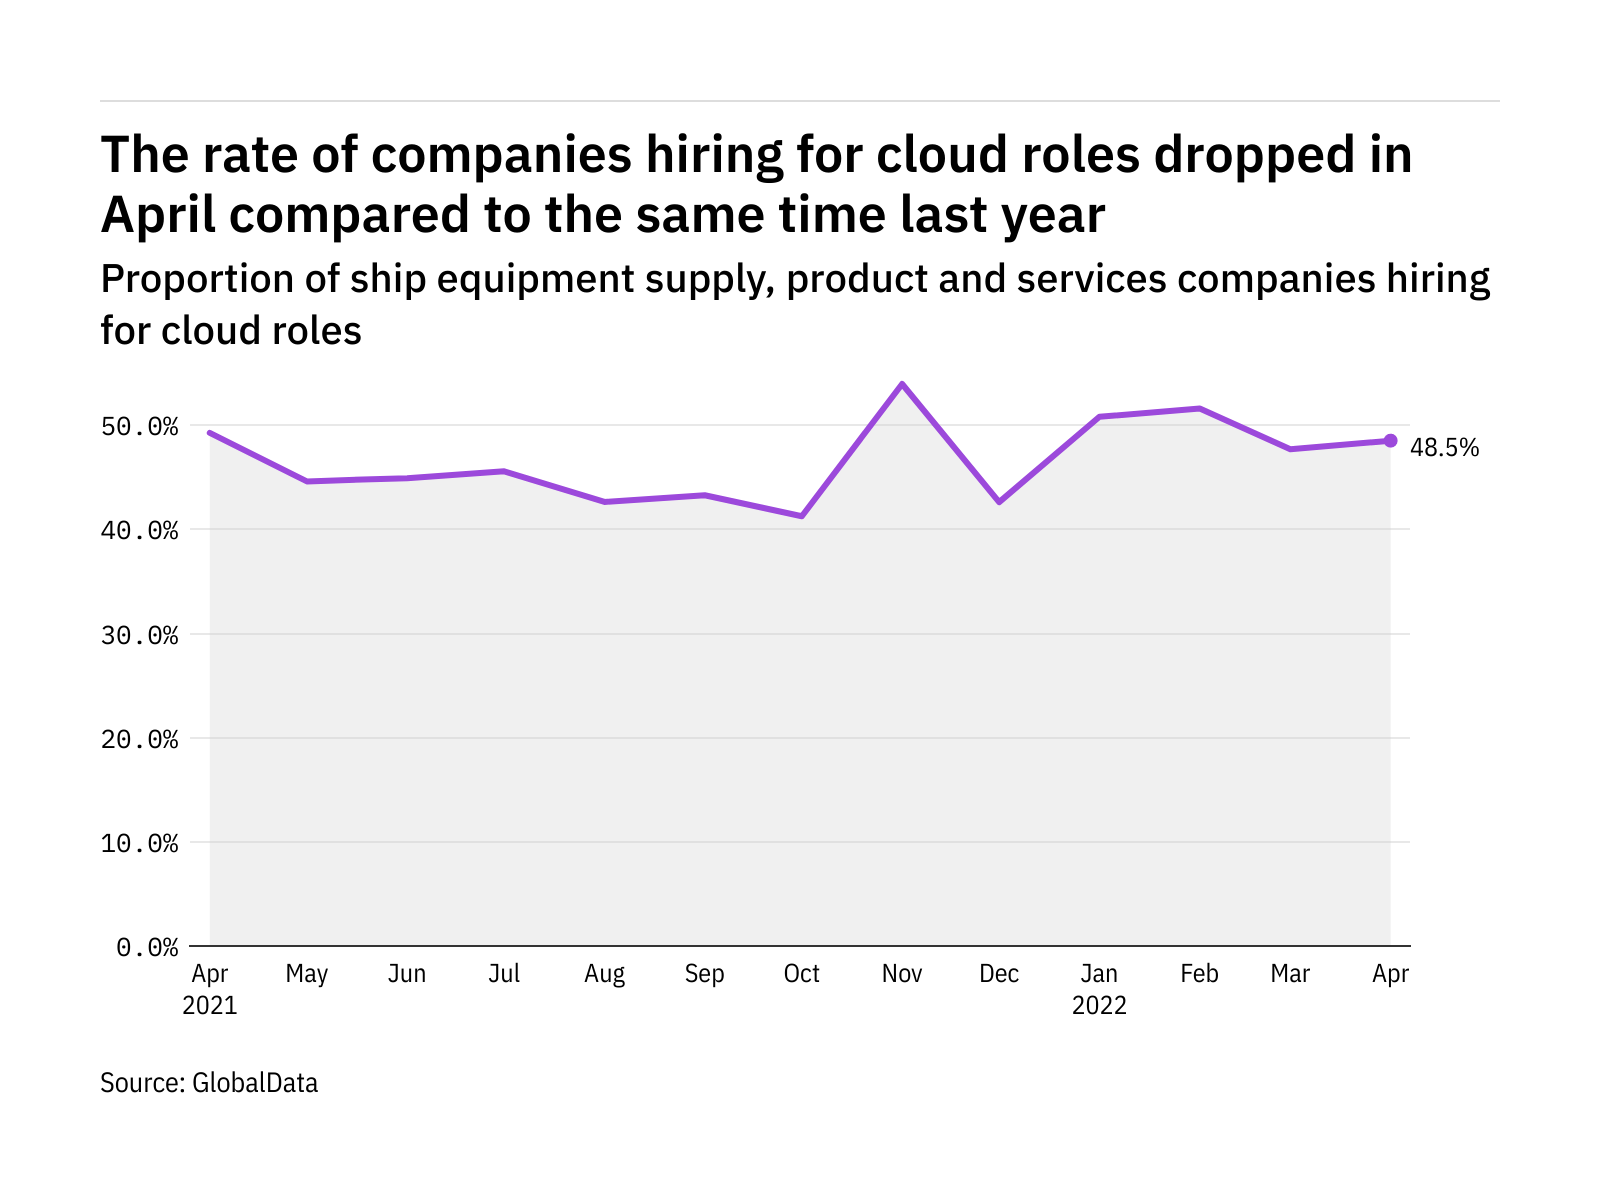 Cloud hiring levels in the ship industry dropped in April 2022